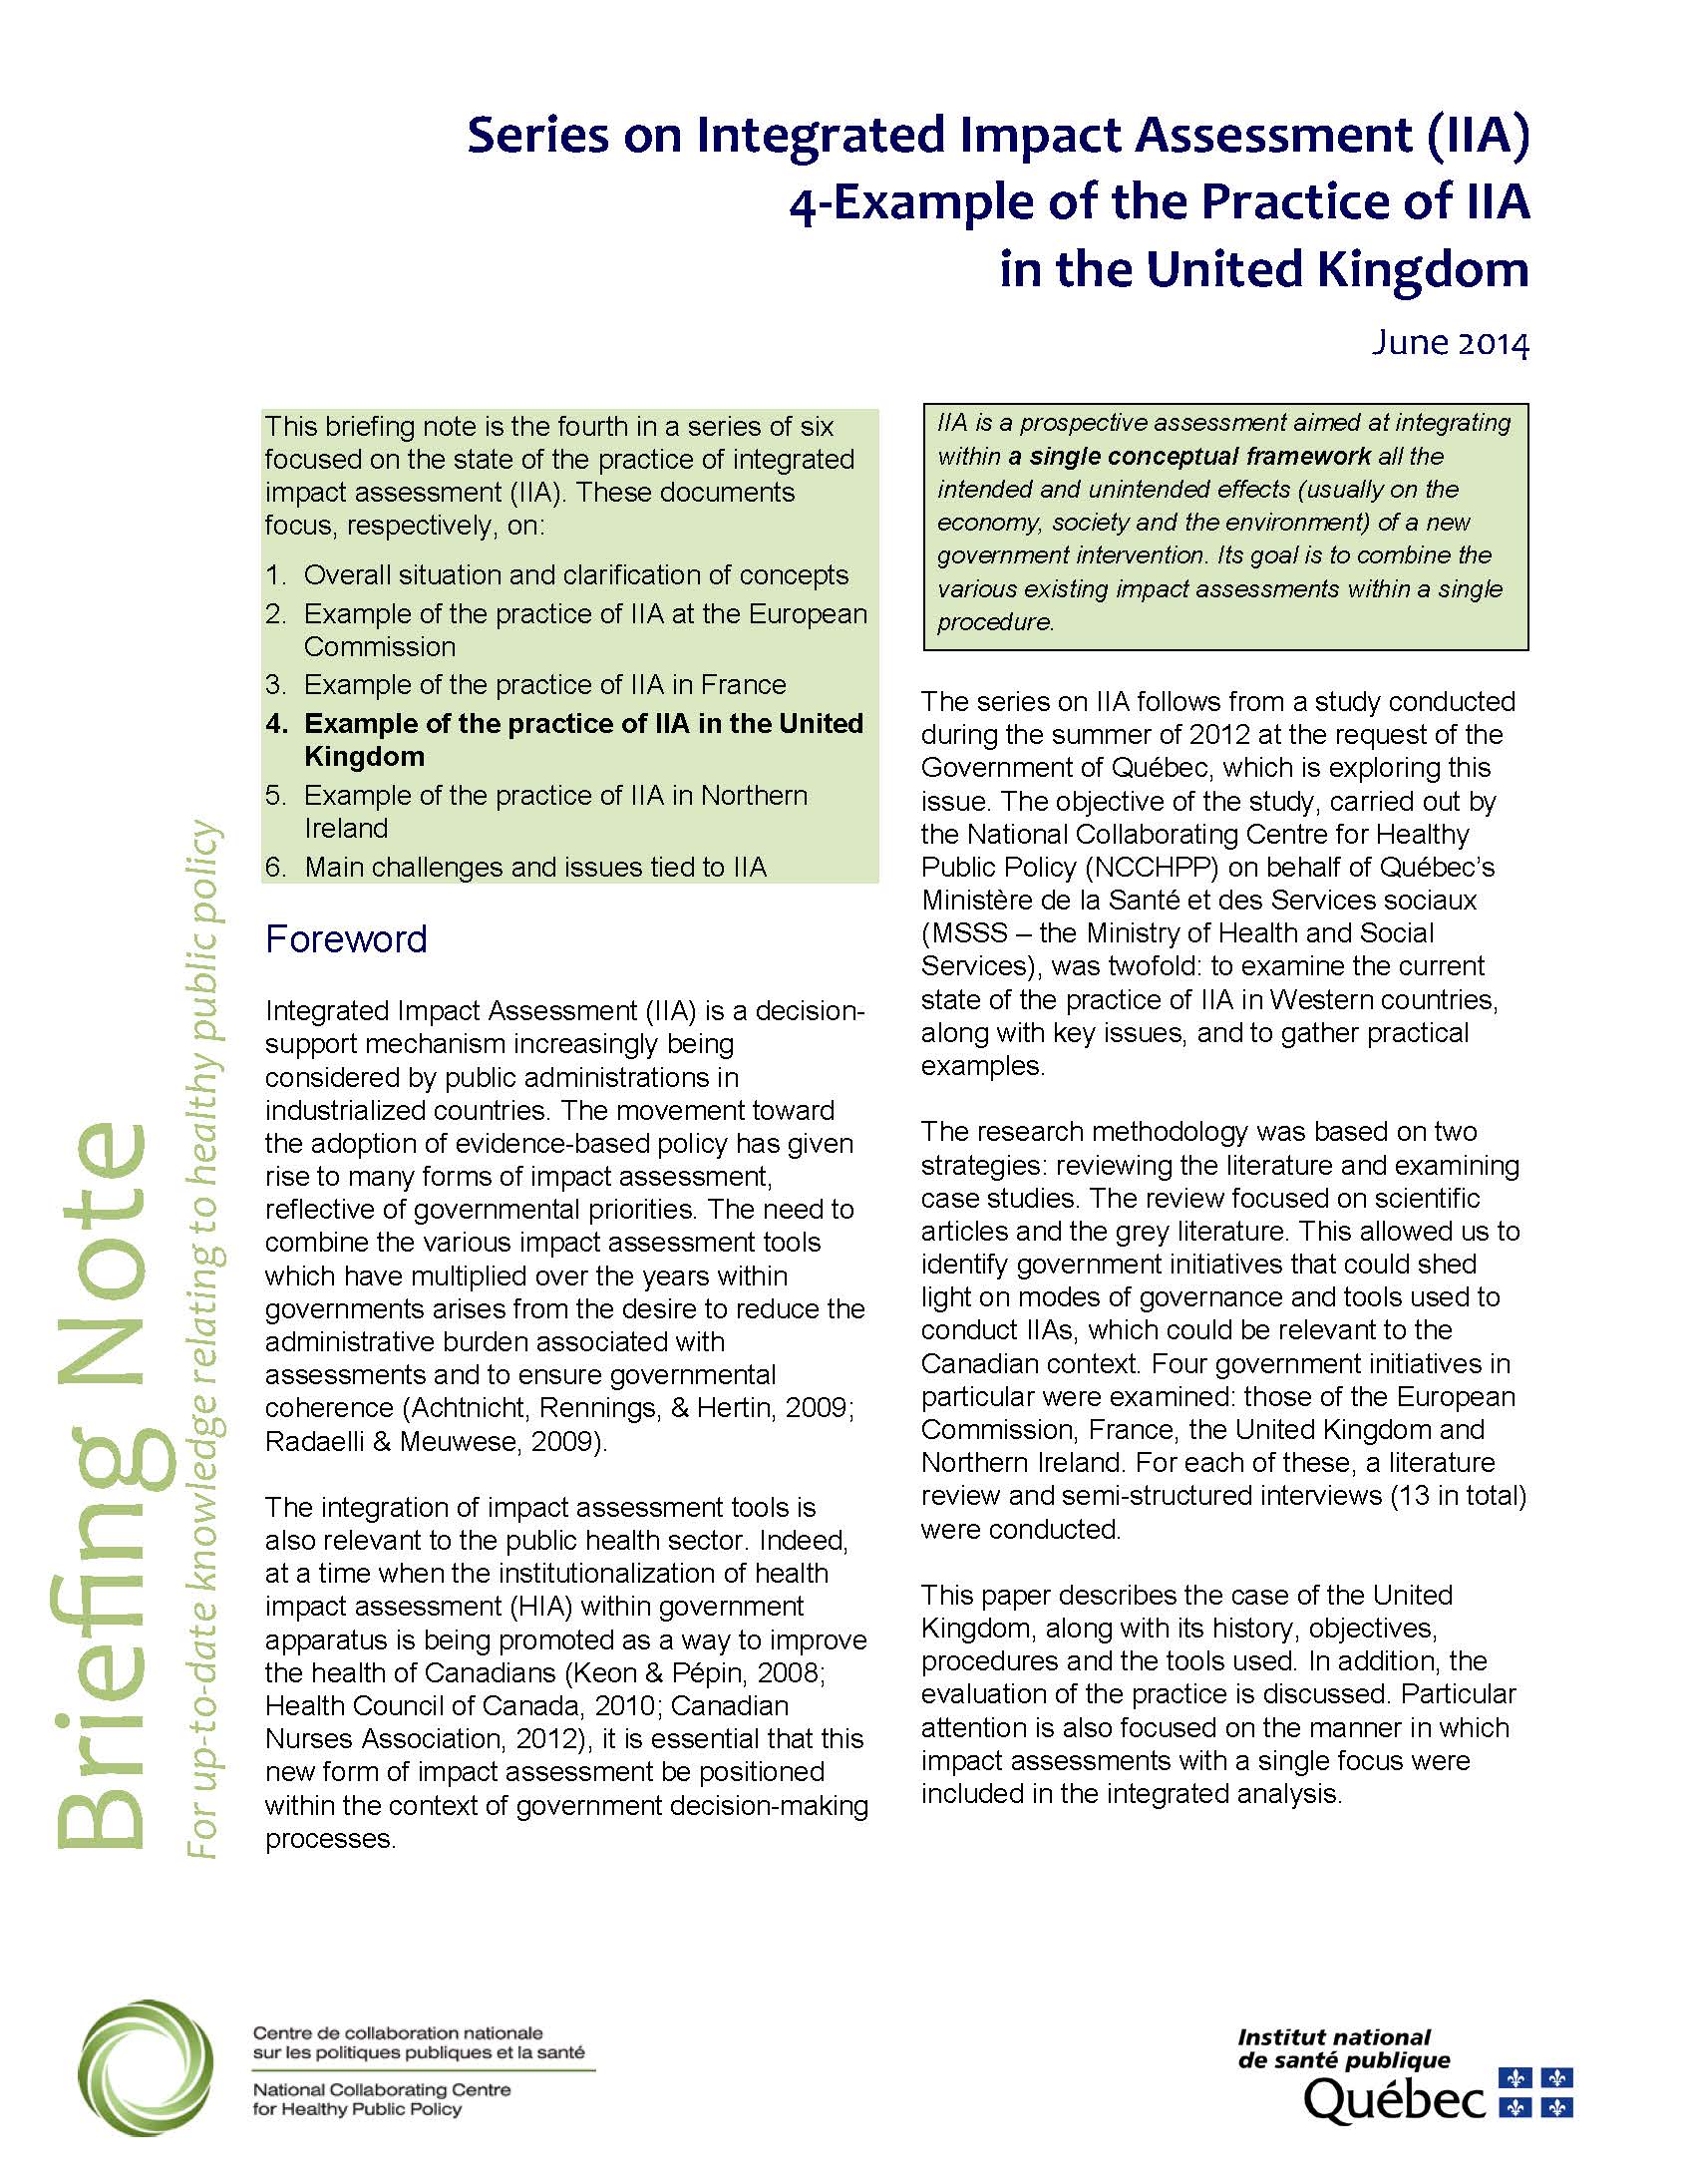 Series on Integrated Impact Assessment (IIA). 4-Example of the practice of IIA in the United Kingdom